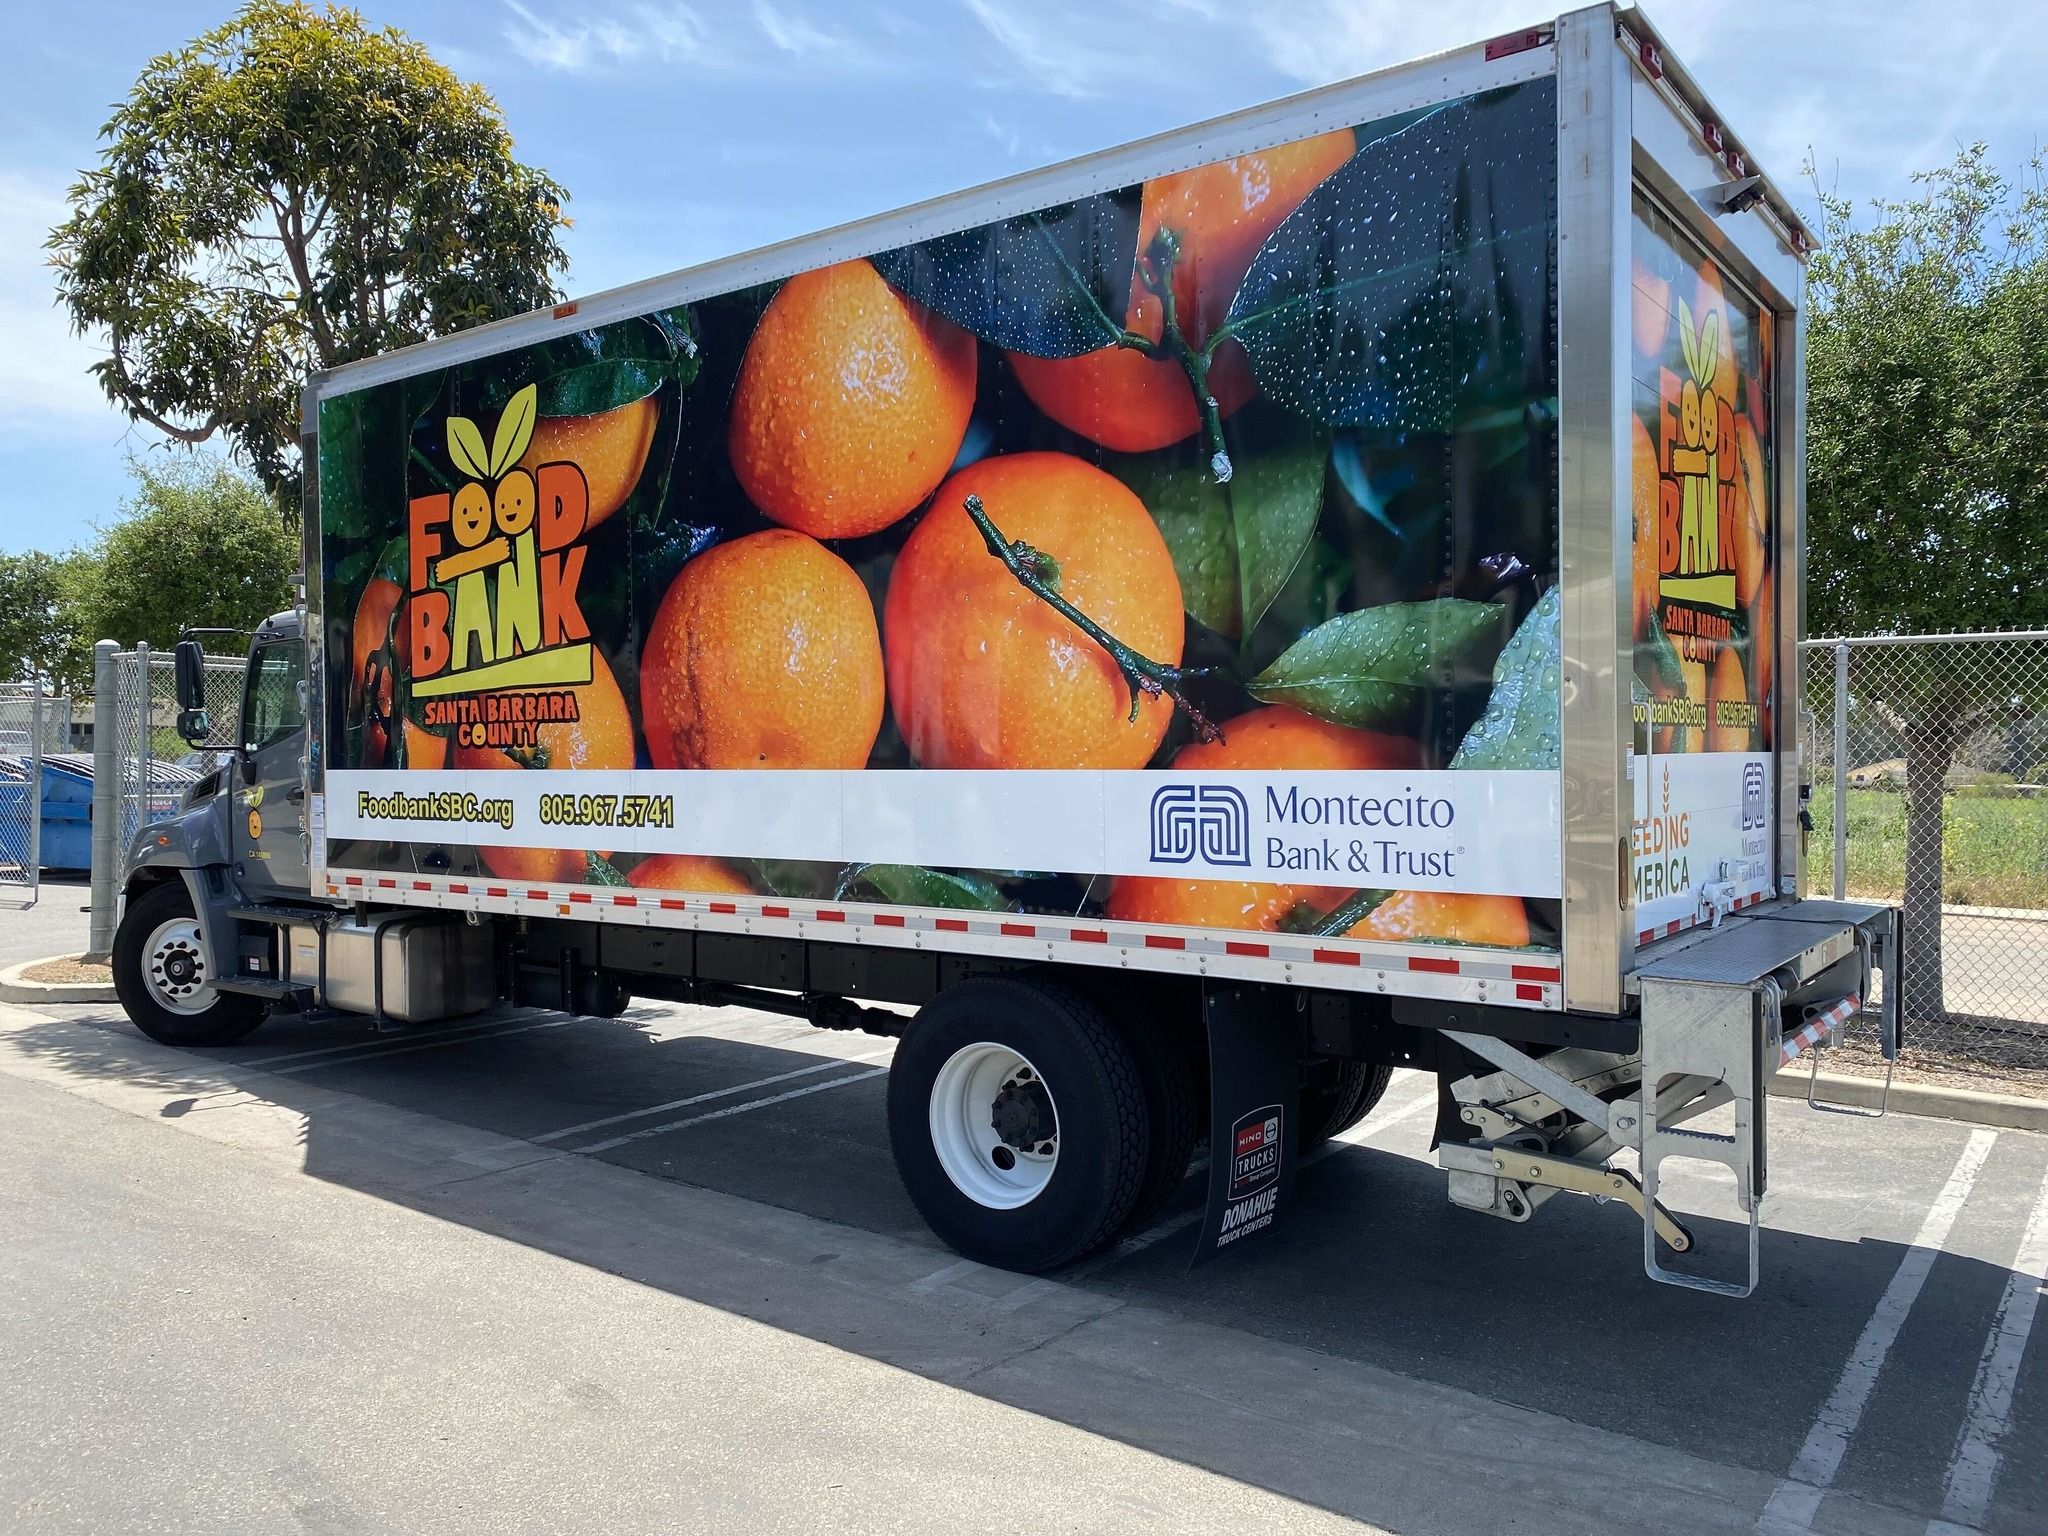 The Foodbank Santa Barbara County truck with vibrantly colored fruits and vegetables painted on the side.